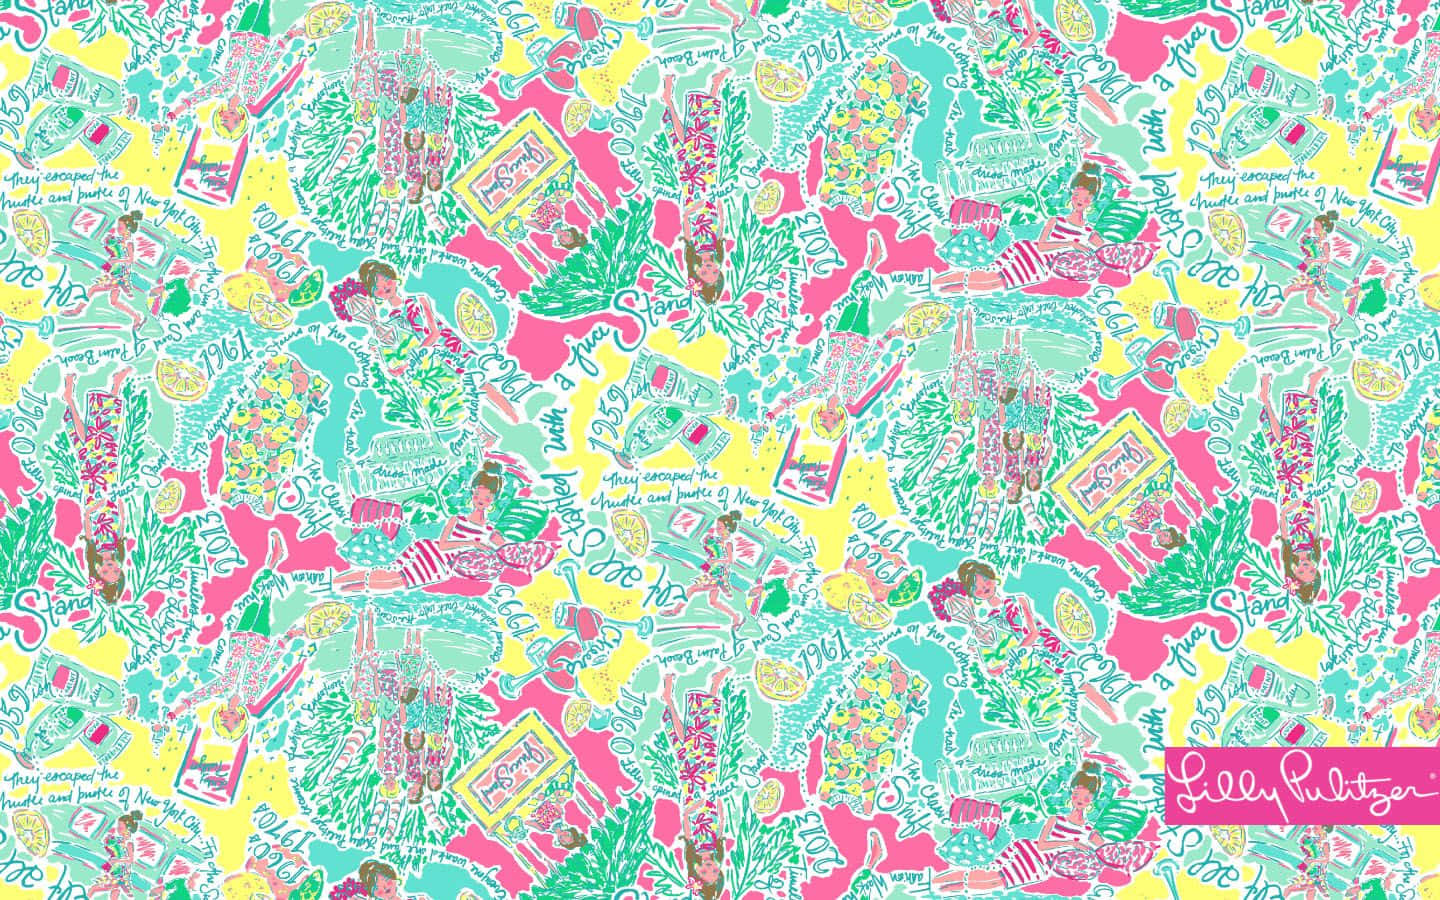 Celebrate summer in style in the latest colorful look from Lilly Pulitzer.